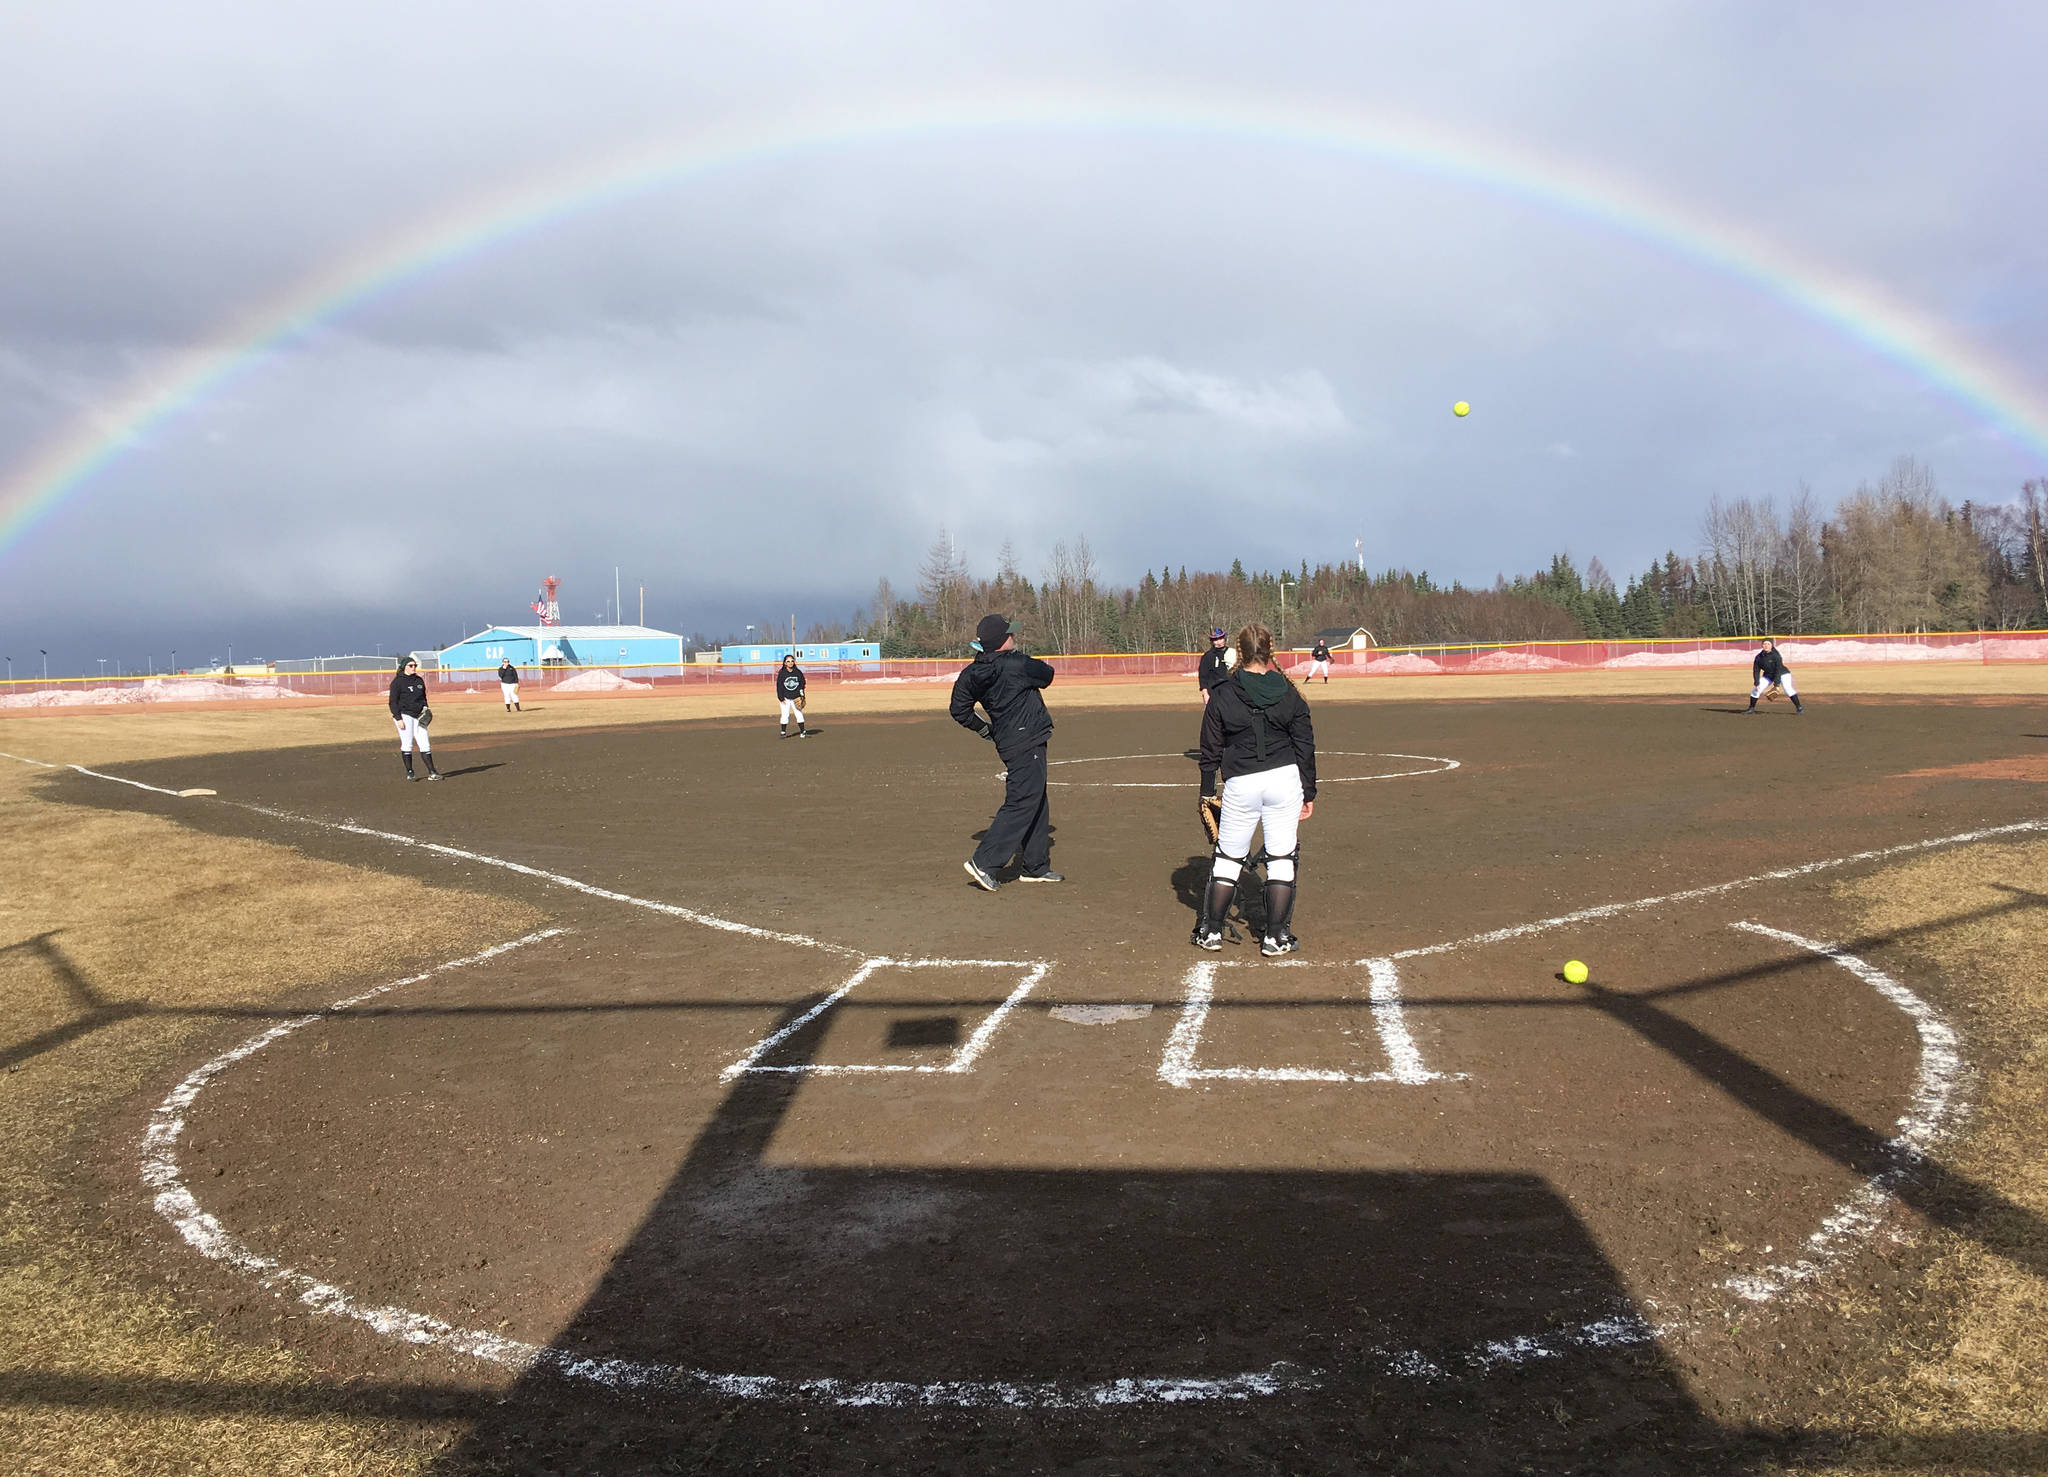 The Colony softball team warms up for a game against Kenai Central on Friday, April 12, 2019, at Steve Shearer Memorial Ball Park in Kenai, Alaska. (Photo by Jeff Helminiak/Peninsula Clarion)